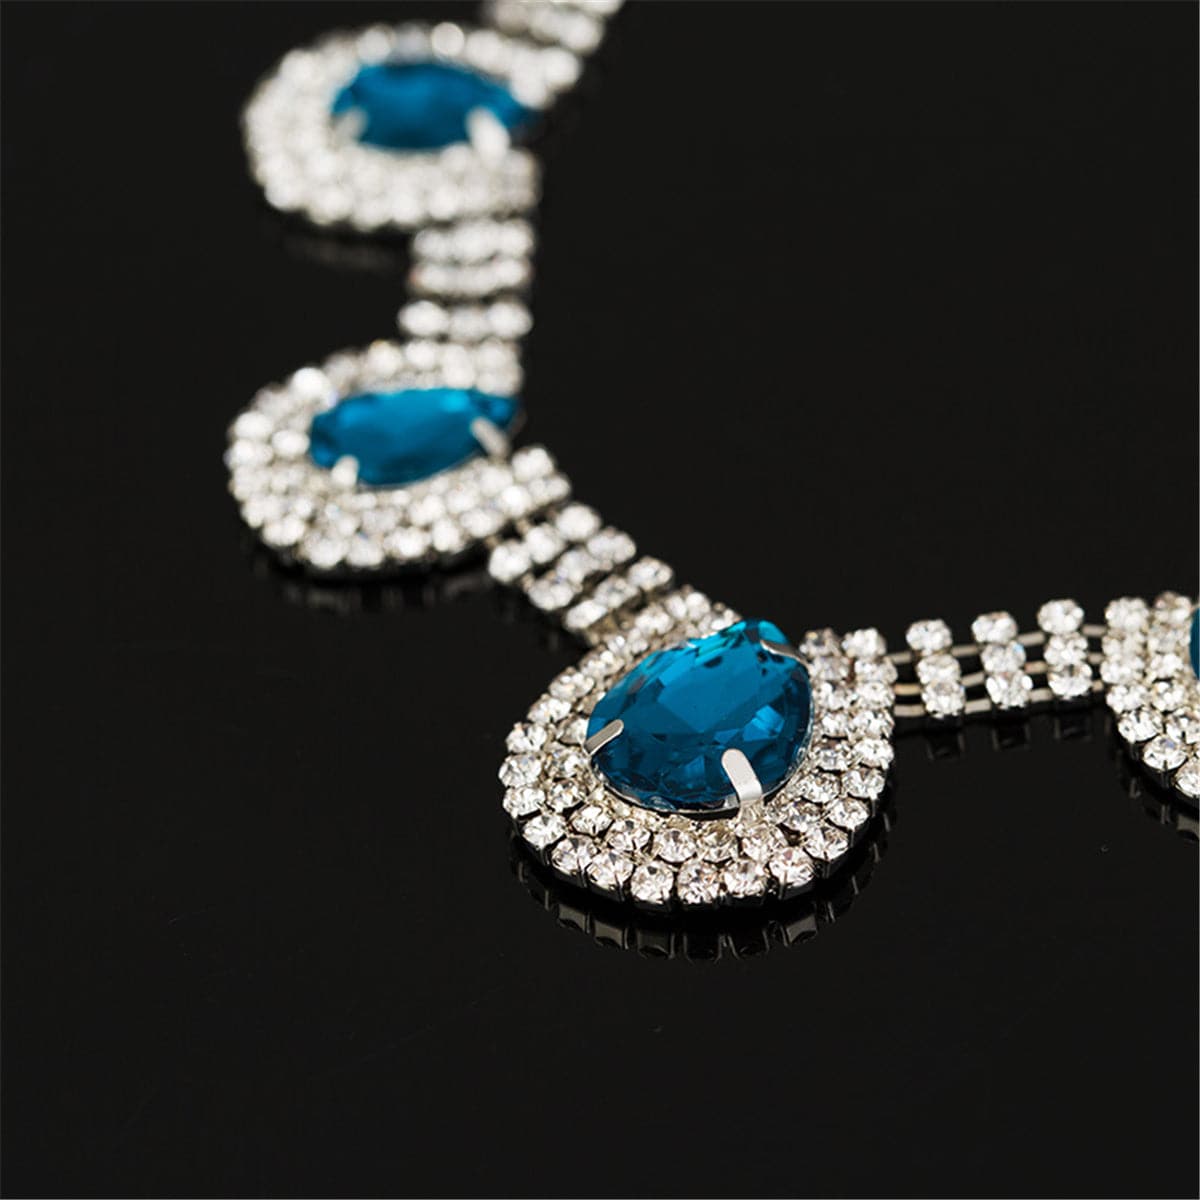 Blue Crystal & Cubic Zirconia Pear Statement Necklace